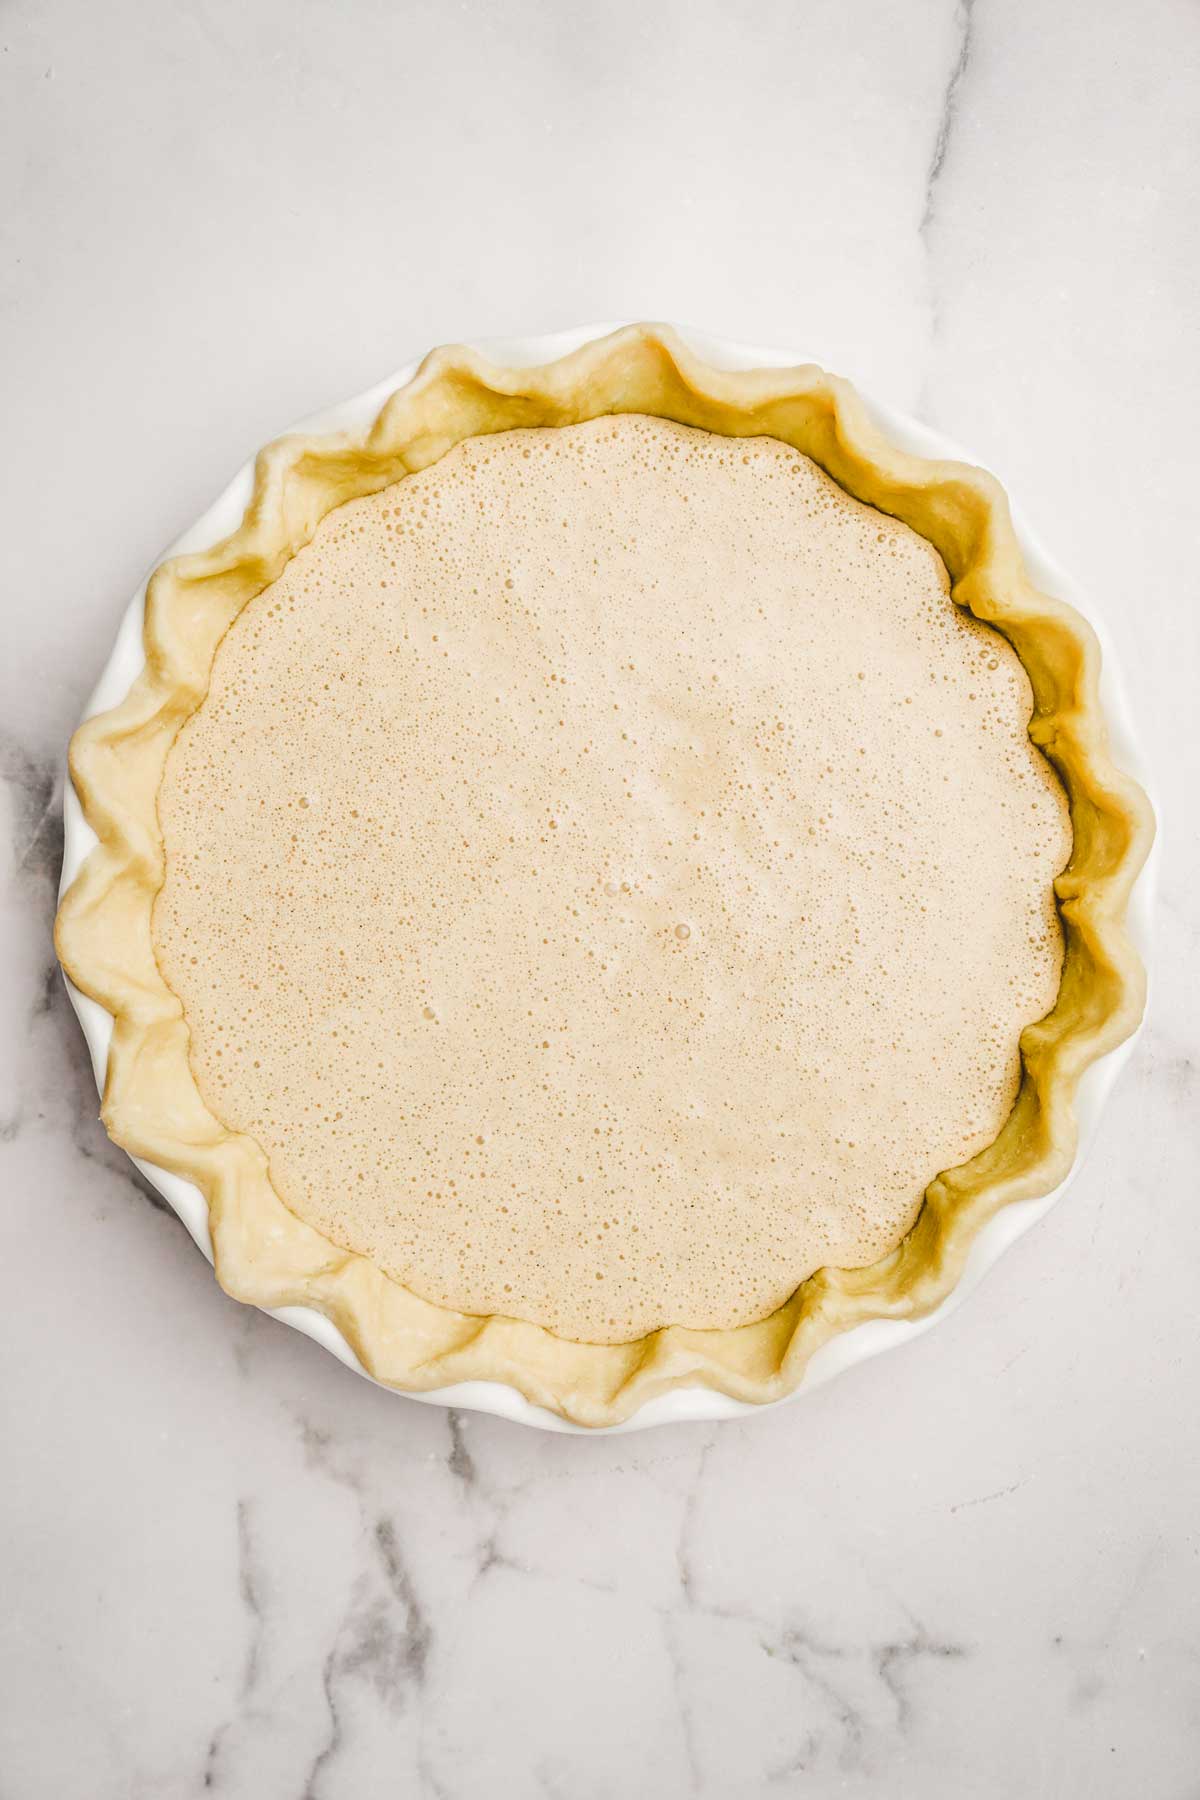 Pie dish with pie crust and cinnamon filling